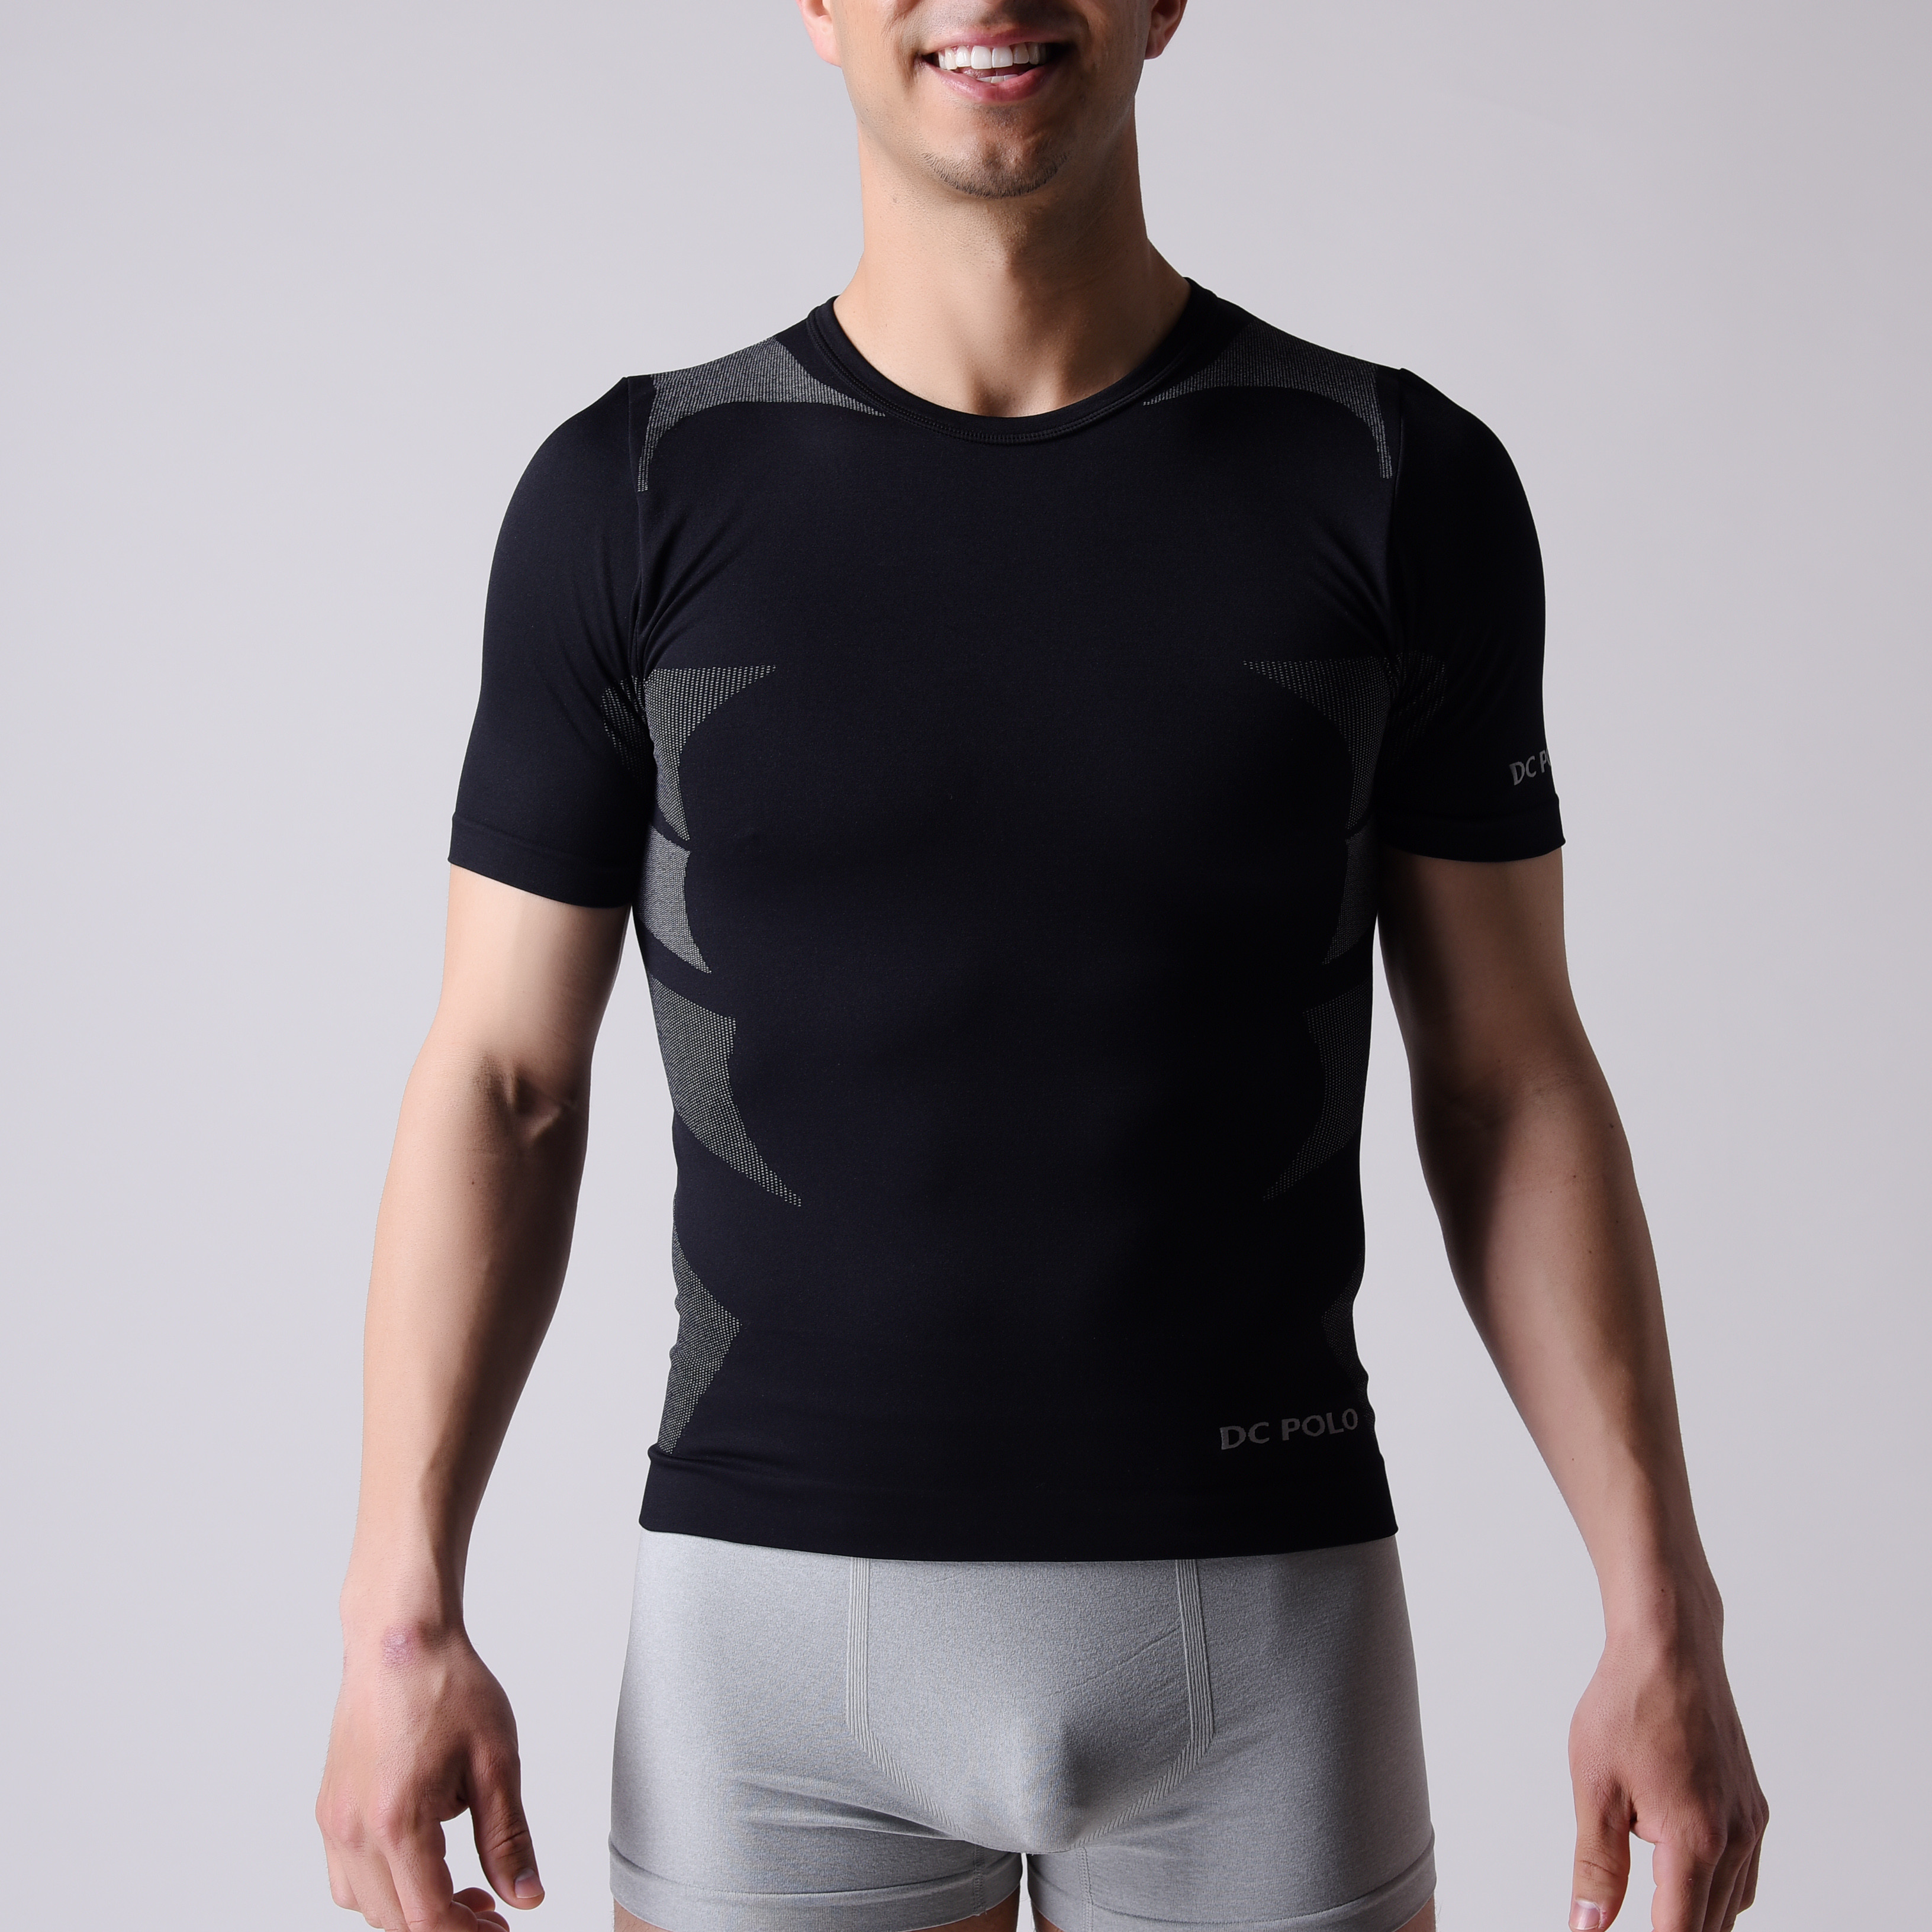 Wholesale T-shirt,   short sleeve,  Men's sports wear,  black and  grey block,   XLSS002, man underwear,  seamless shirts. from china suppliers